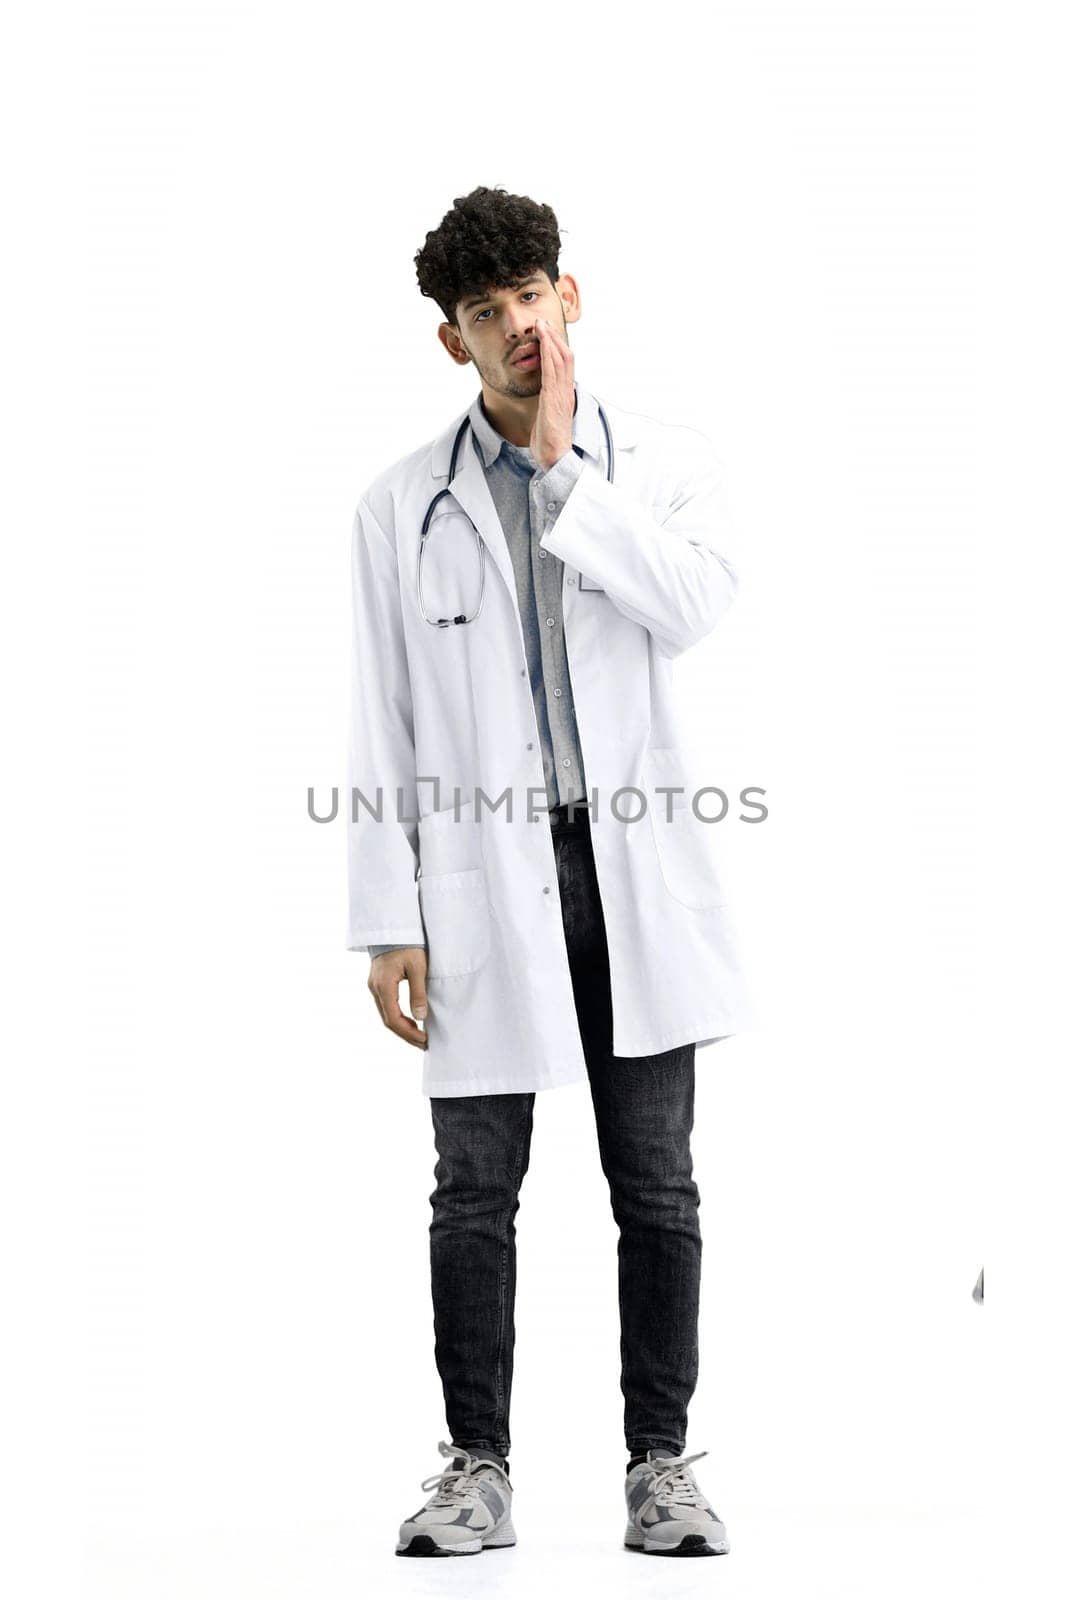 A male doctor, full-length, on a white background, tells a secret.